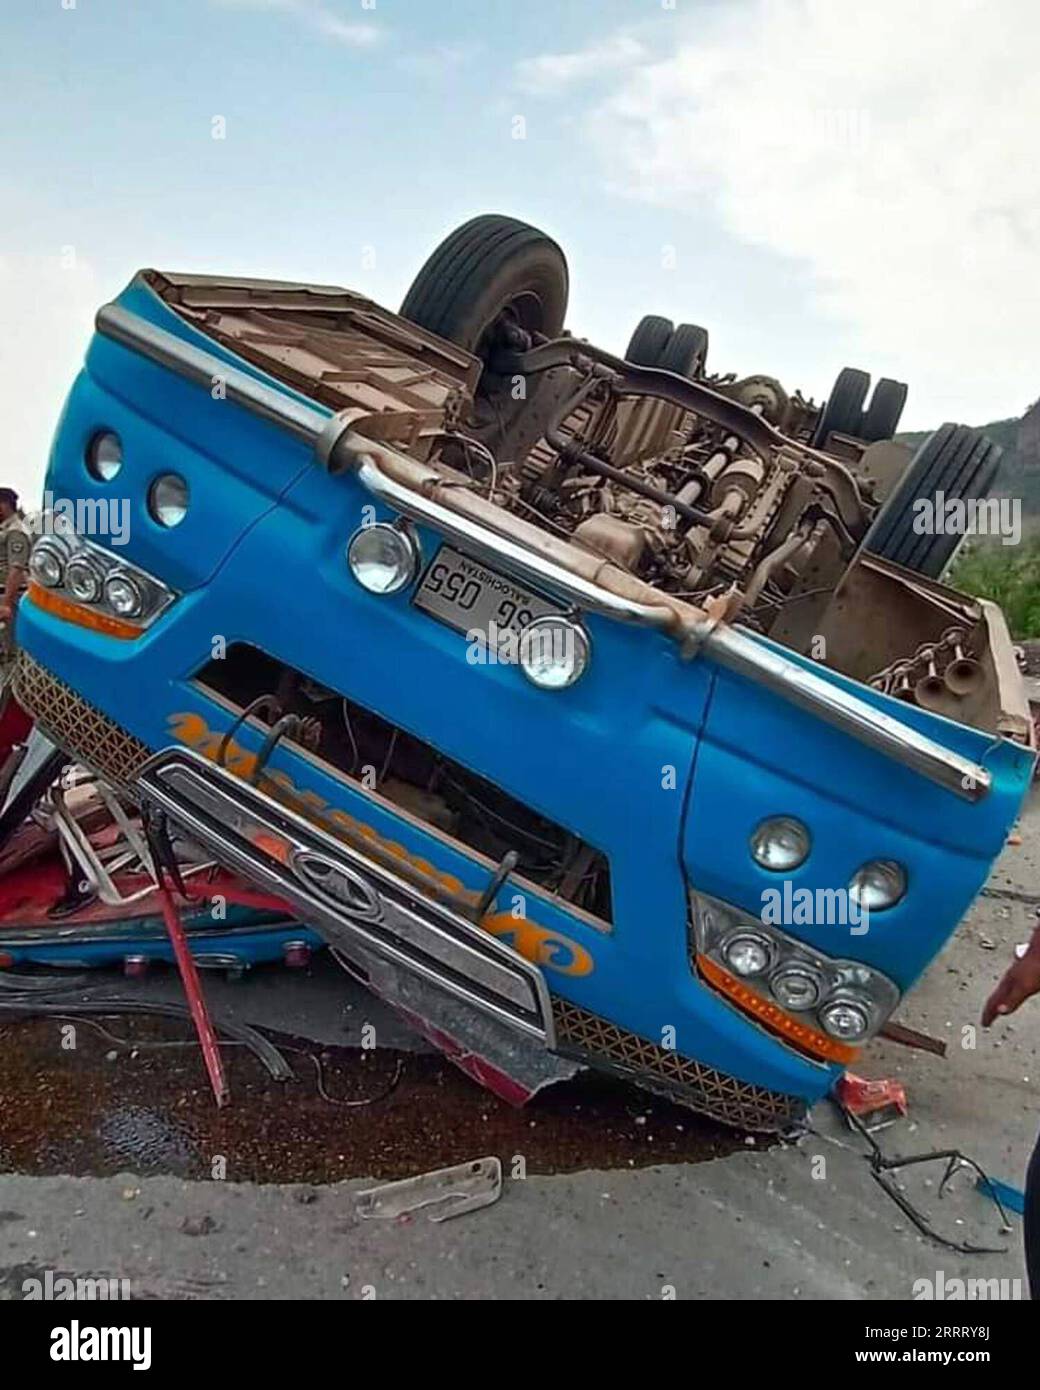 230618 -- CHAKWAL, June 18, 2023 -- An overturned passenger bus is pictured at a road accident site in Chakwal district of Pakistan s eastern Punjab province on June 17, 2023. At least 14 people were killed and over 20 others injured when a passenger bus turned turtle in Chakwal district of Pakistan s eastern Punjab province on Saturday, police officers said. The accident took place on the motorway near Kallar Kahar area of the district when the driver of the bus lost control of the vehicle due to brake failure, leading to the tragic crash, Deputy Inspector General of National Highways and Mot Stock Photo